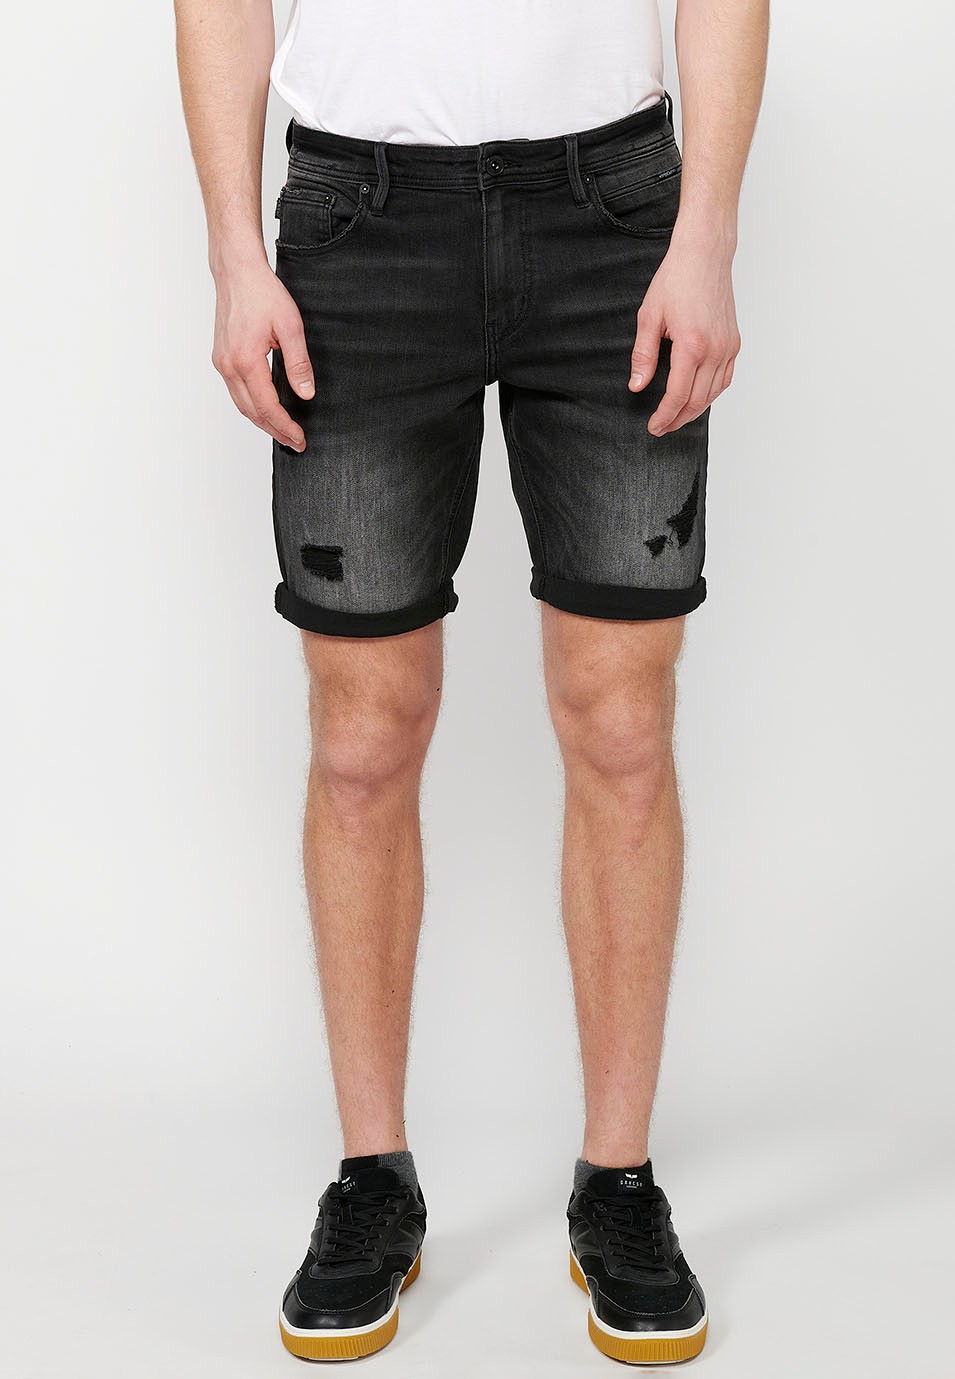 Black Denim Bermuda Shorts with Turn-Up Finish and Front Zipper and Button Closure for Men 3